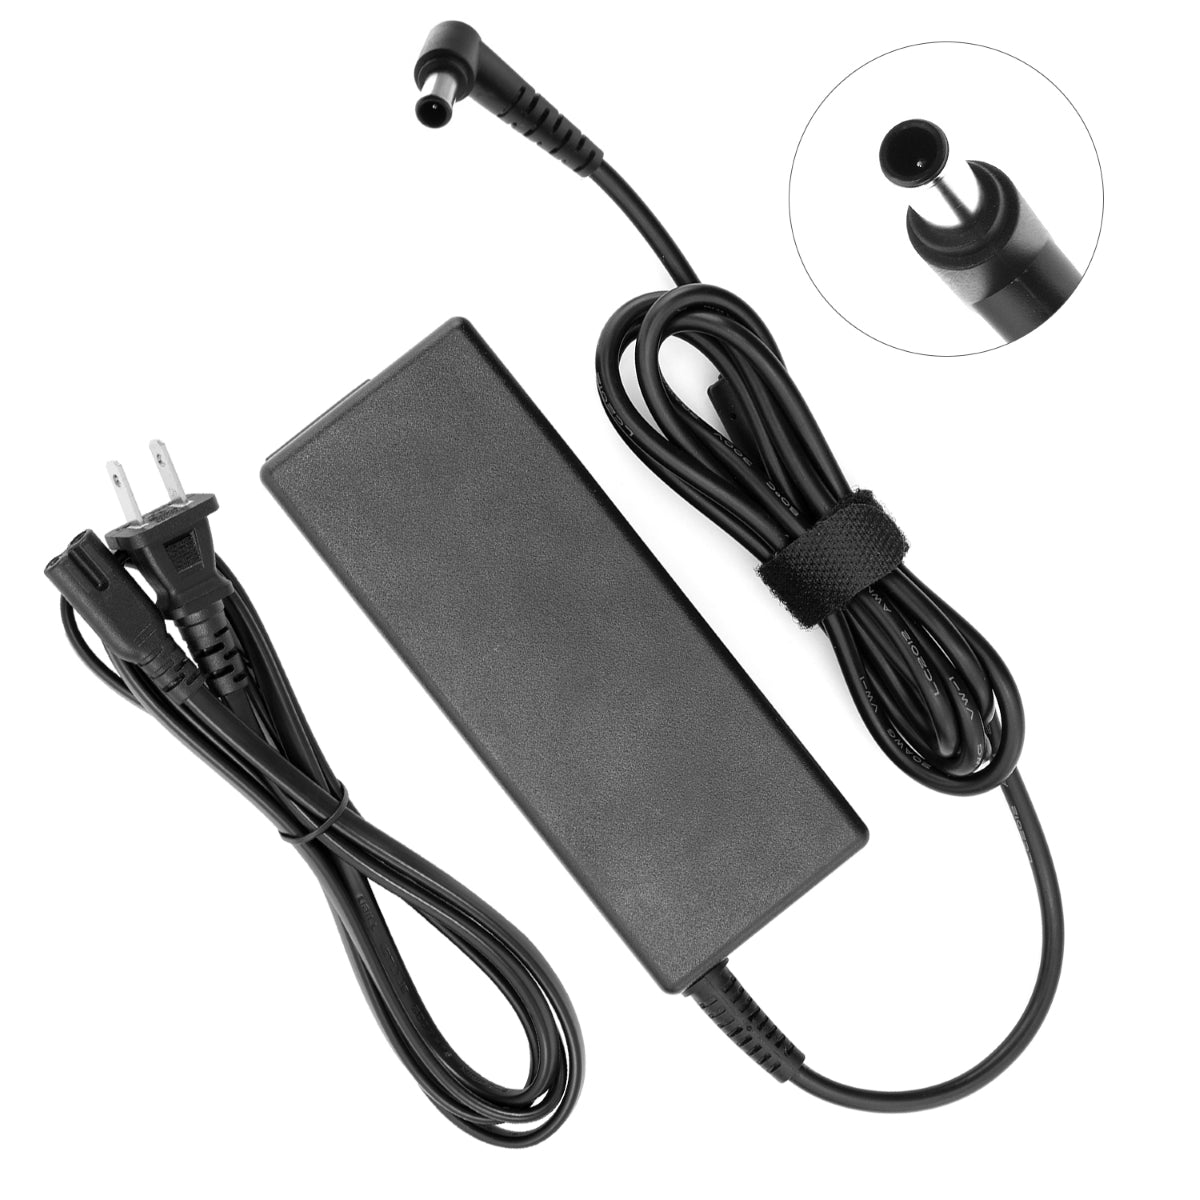 Power Adapter for LG 27MP38VQ-B Monitor TV